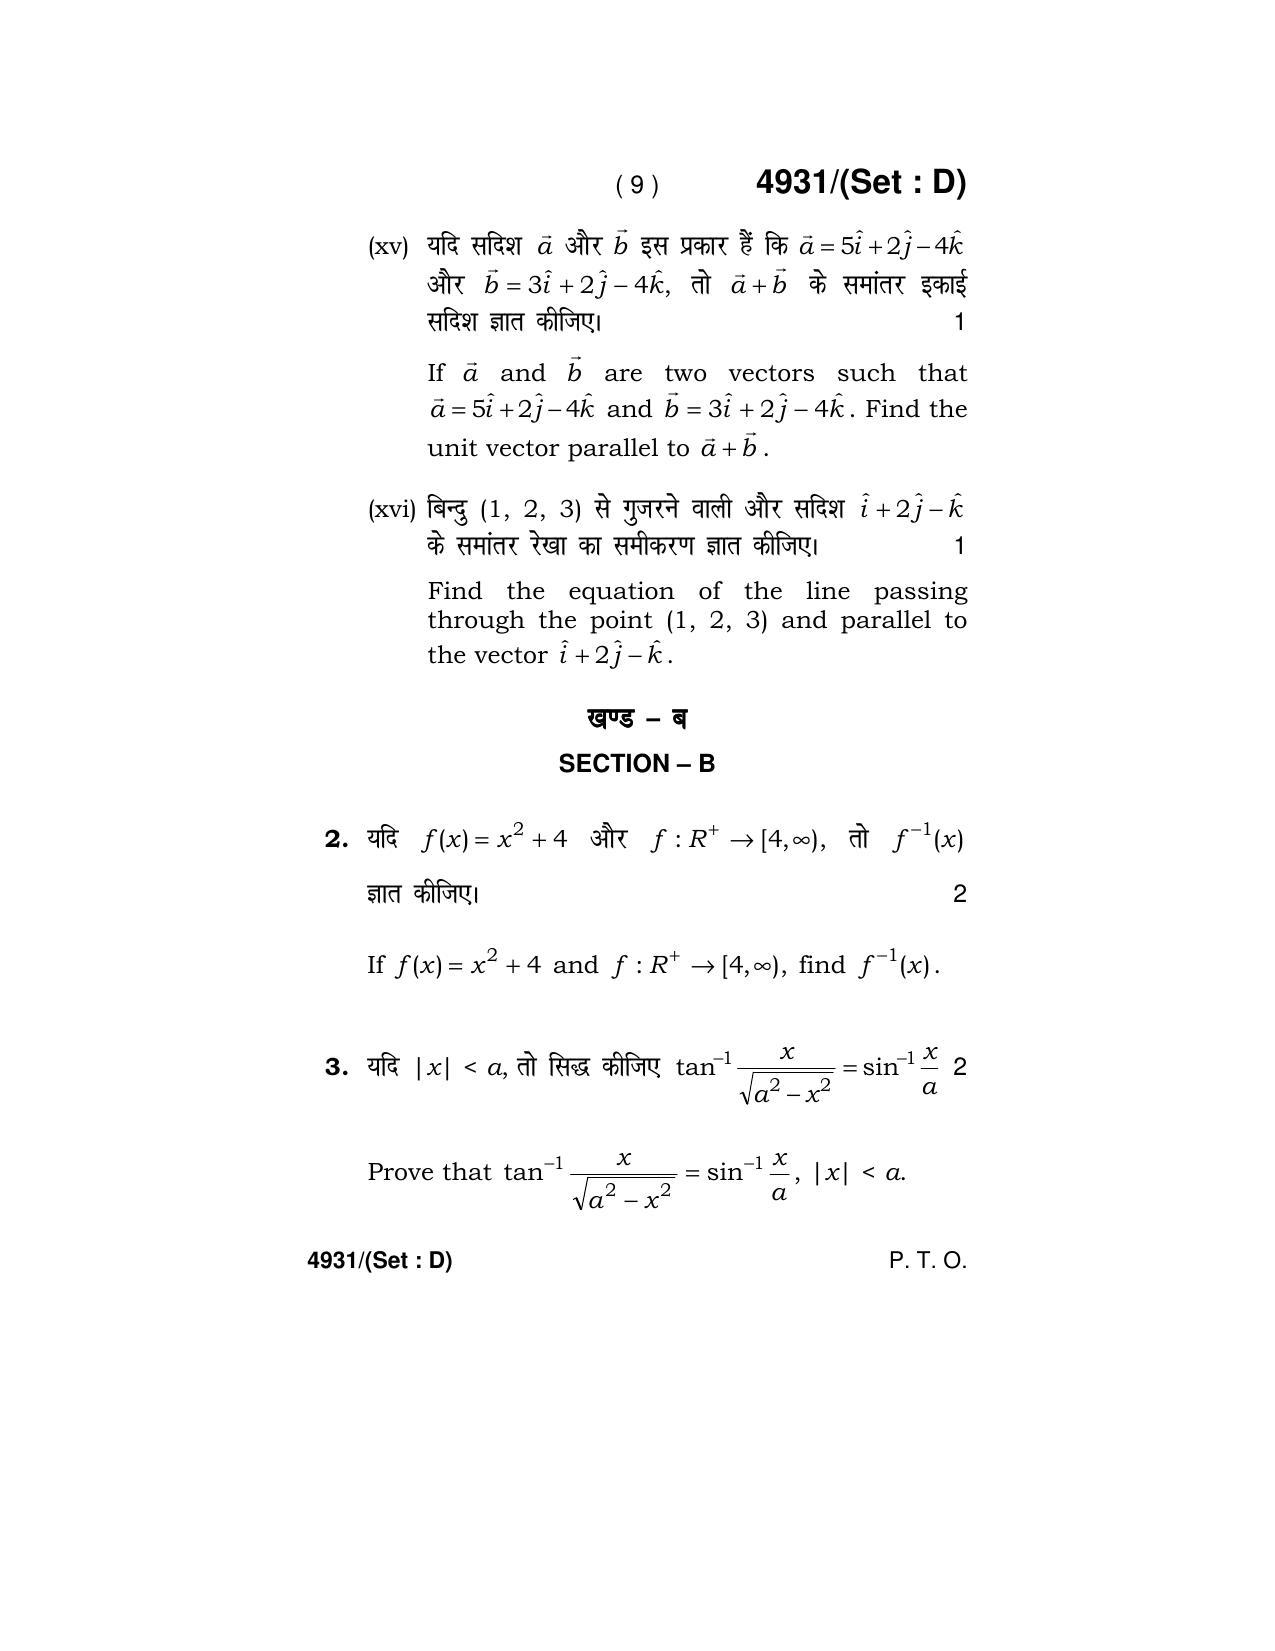 Haryana Board HBSE Class 12 Mathematics 2020 Question Paper - Page 57